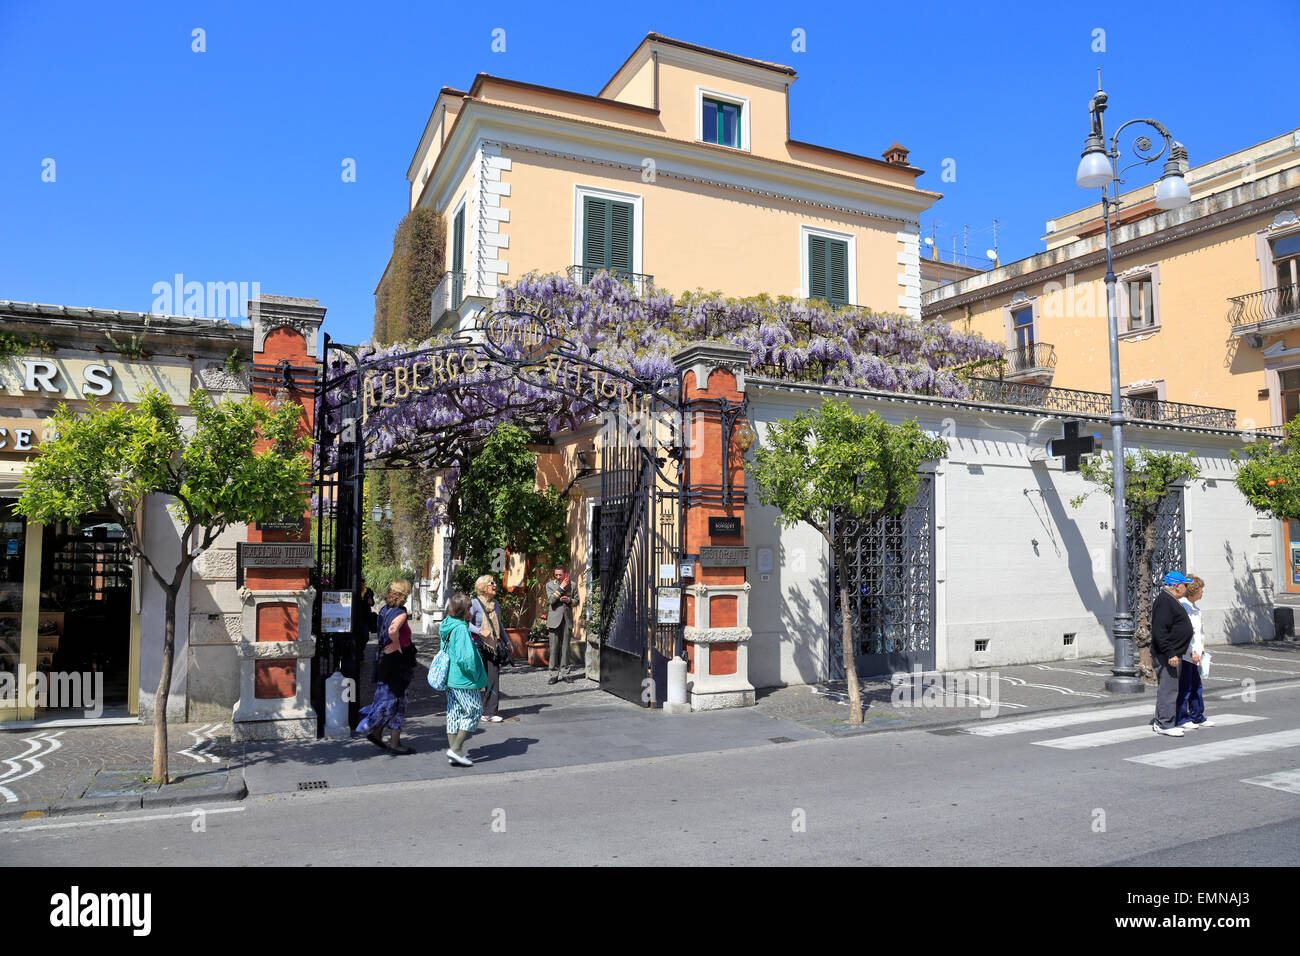 Entrance to the Grand Hotel Excelsior Vittoria, Sorrento, Italy. Stock Photo